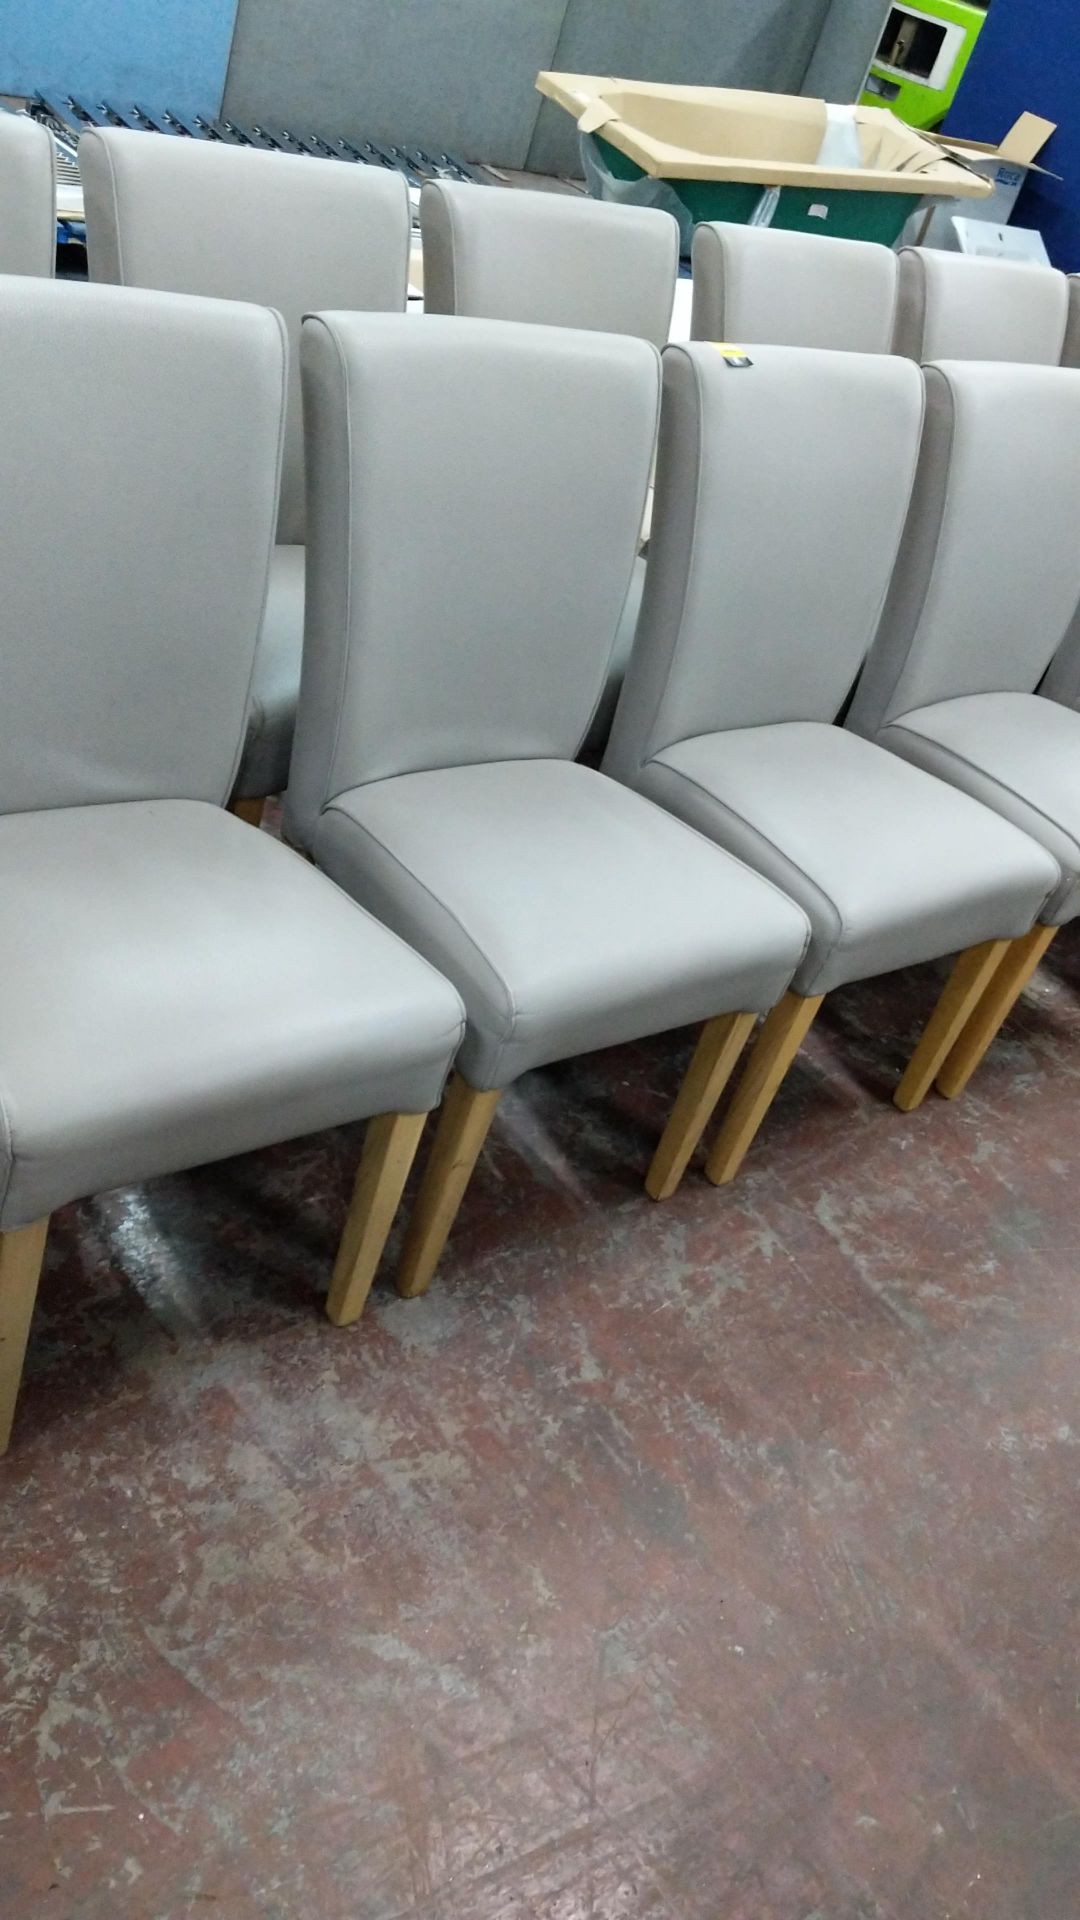 6 off dining chairs with wooden legs, upholstered in taupe leatherette type fabric, understood to - Image 5 of 7